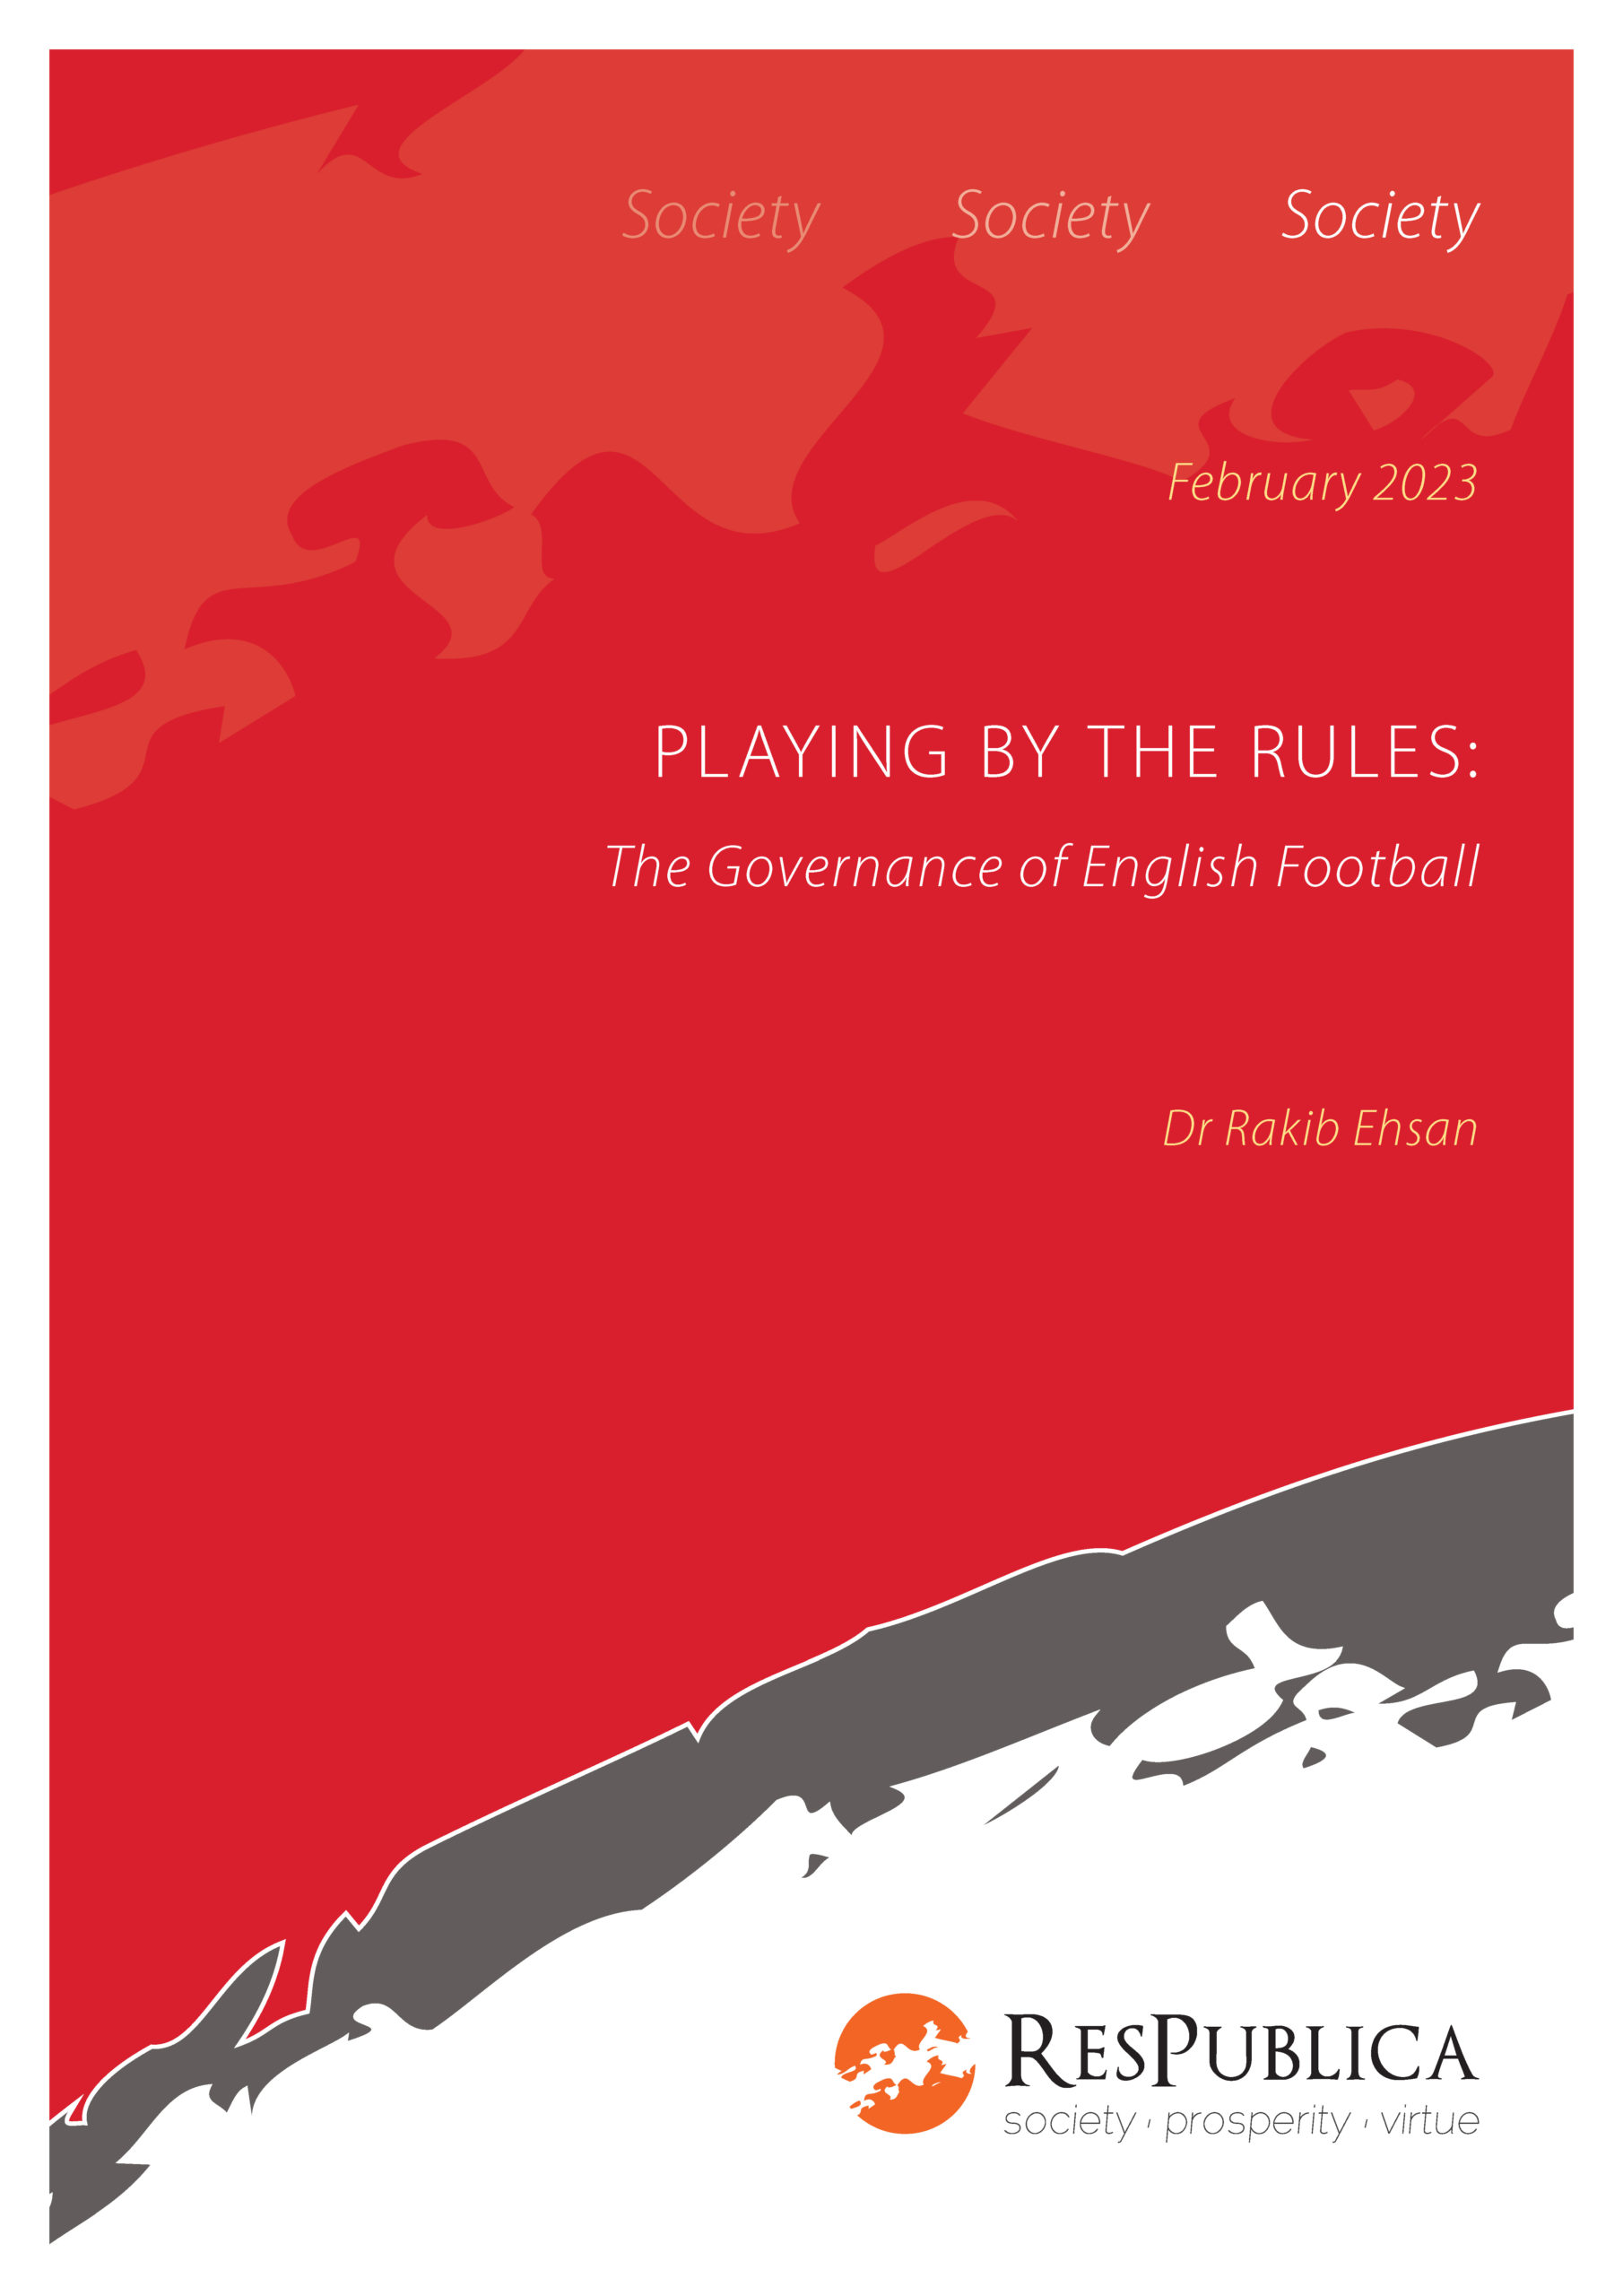 Playing by the Rules: The Governance of English Football